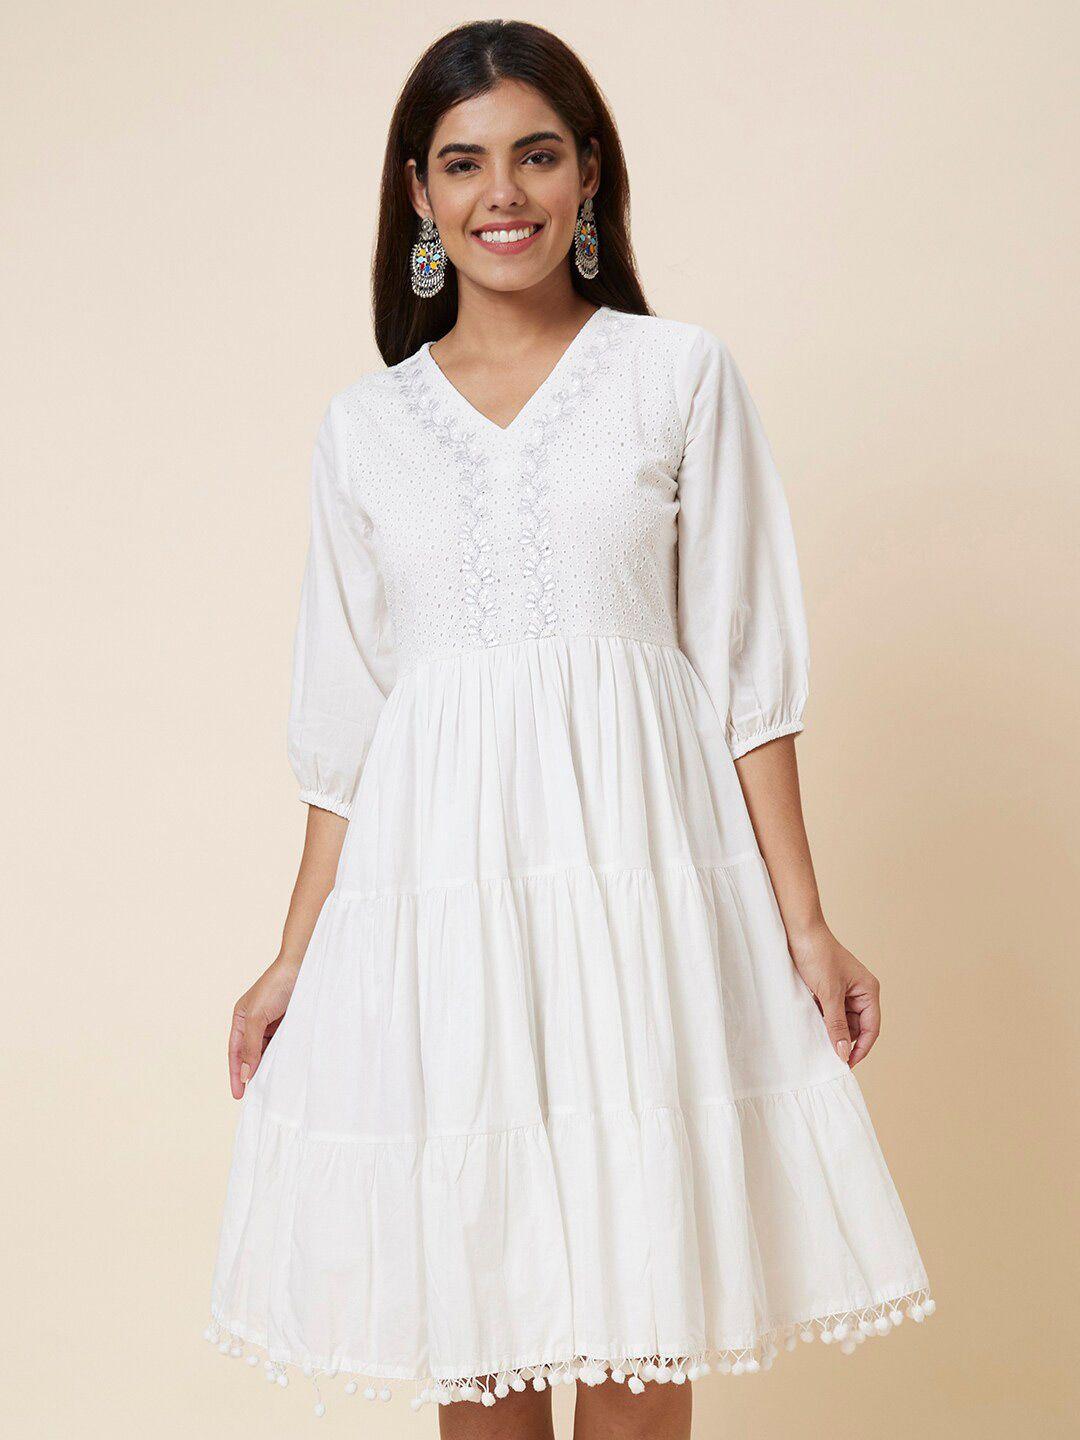 globus white v-neck embroidered tiered pure cotton fit & flare dress